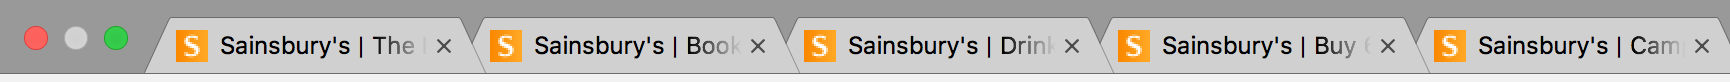 Browser tabs for five different Sainsbury's pages, all showing the word Sainsbury's and only a few letters for what each page is about.